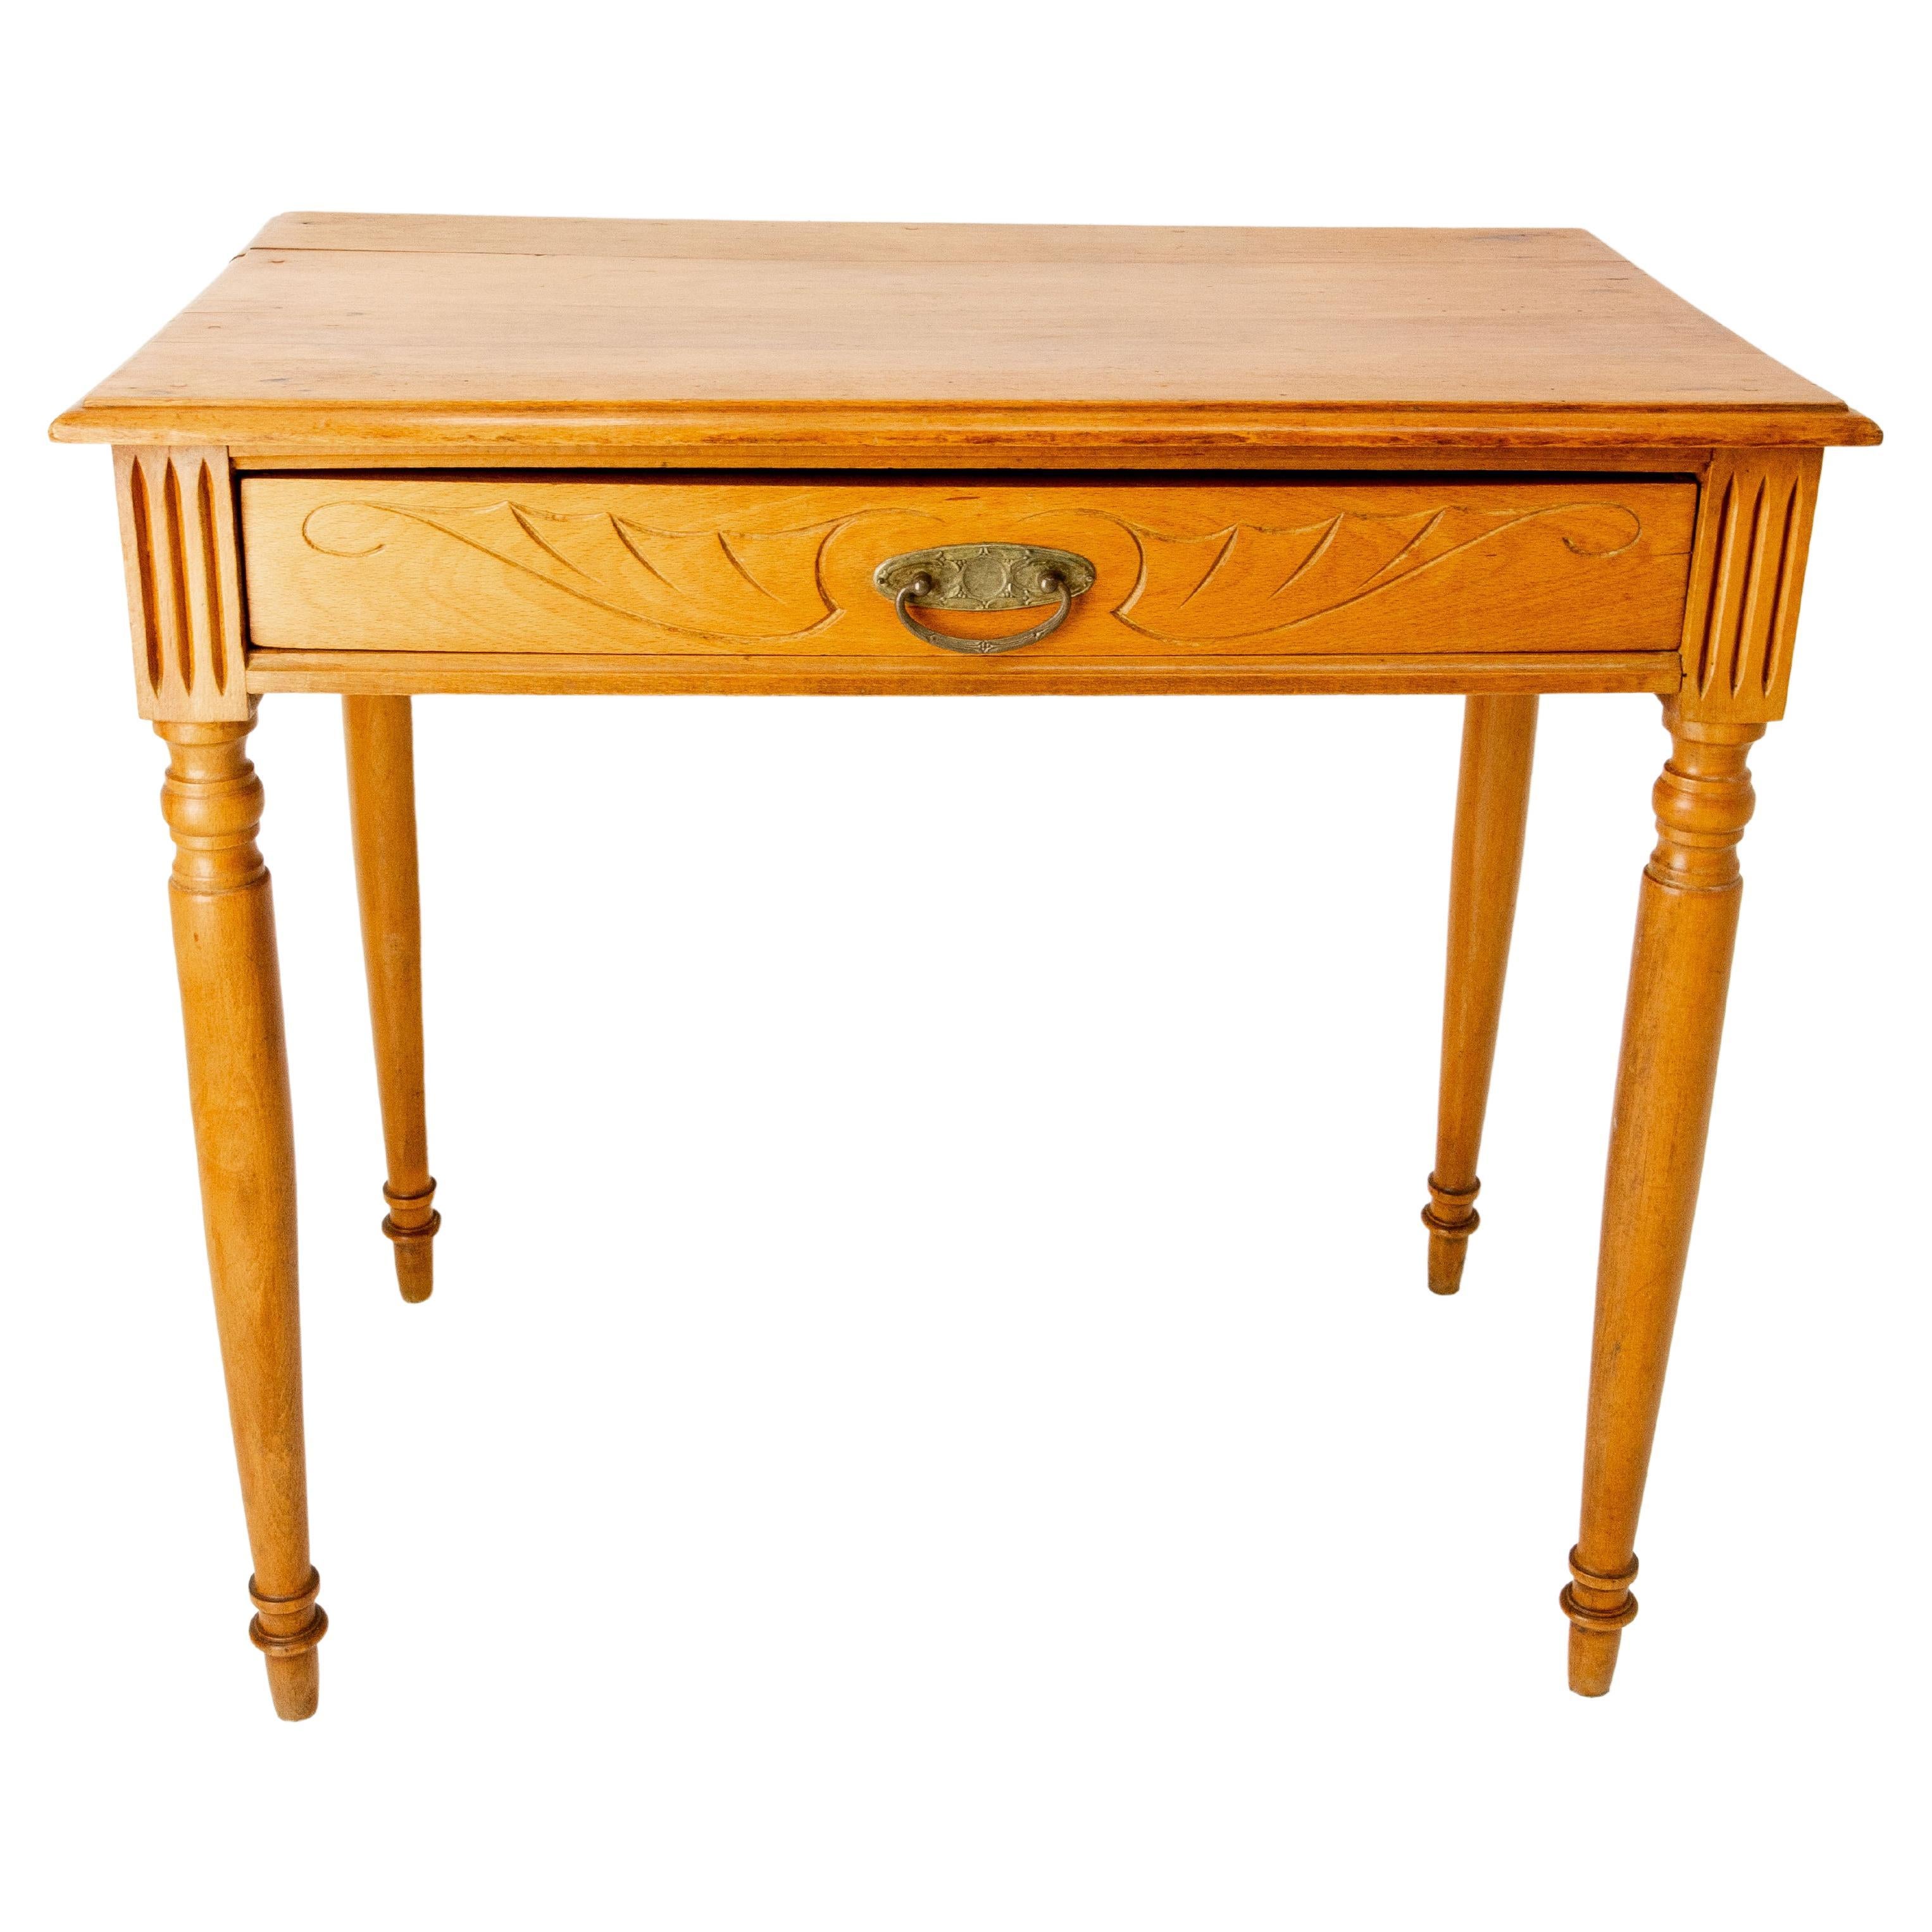 French Art Nouveau Beech Writing Table, Desk or Side Table, circa 1900 For Sale